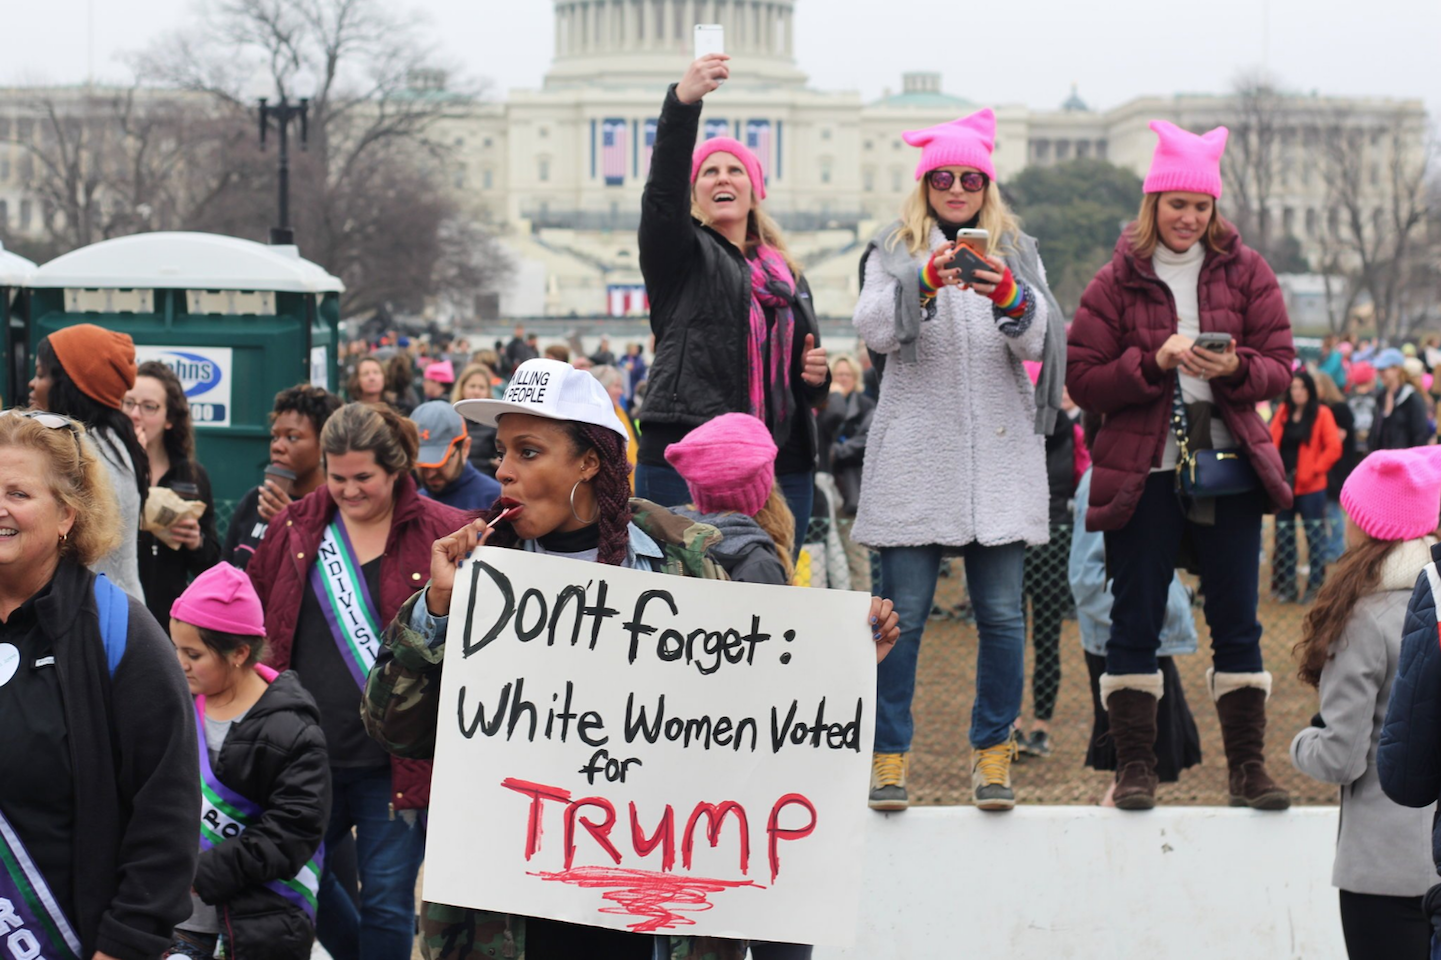 Protesters at the Women's March on Washington.